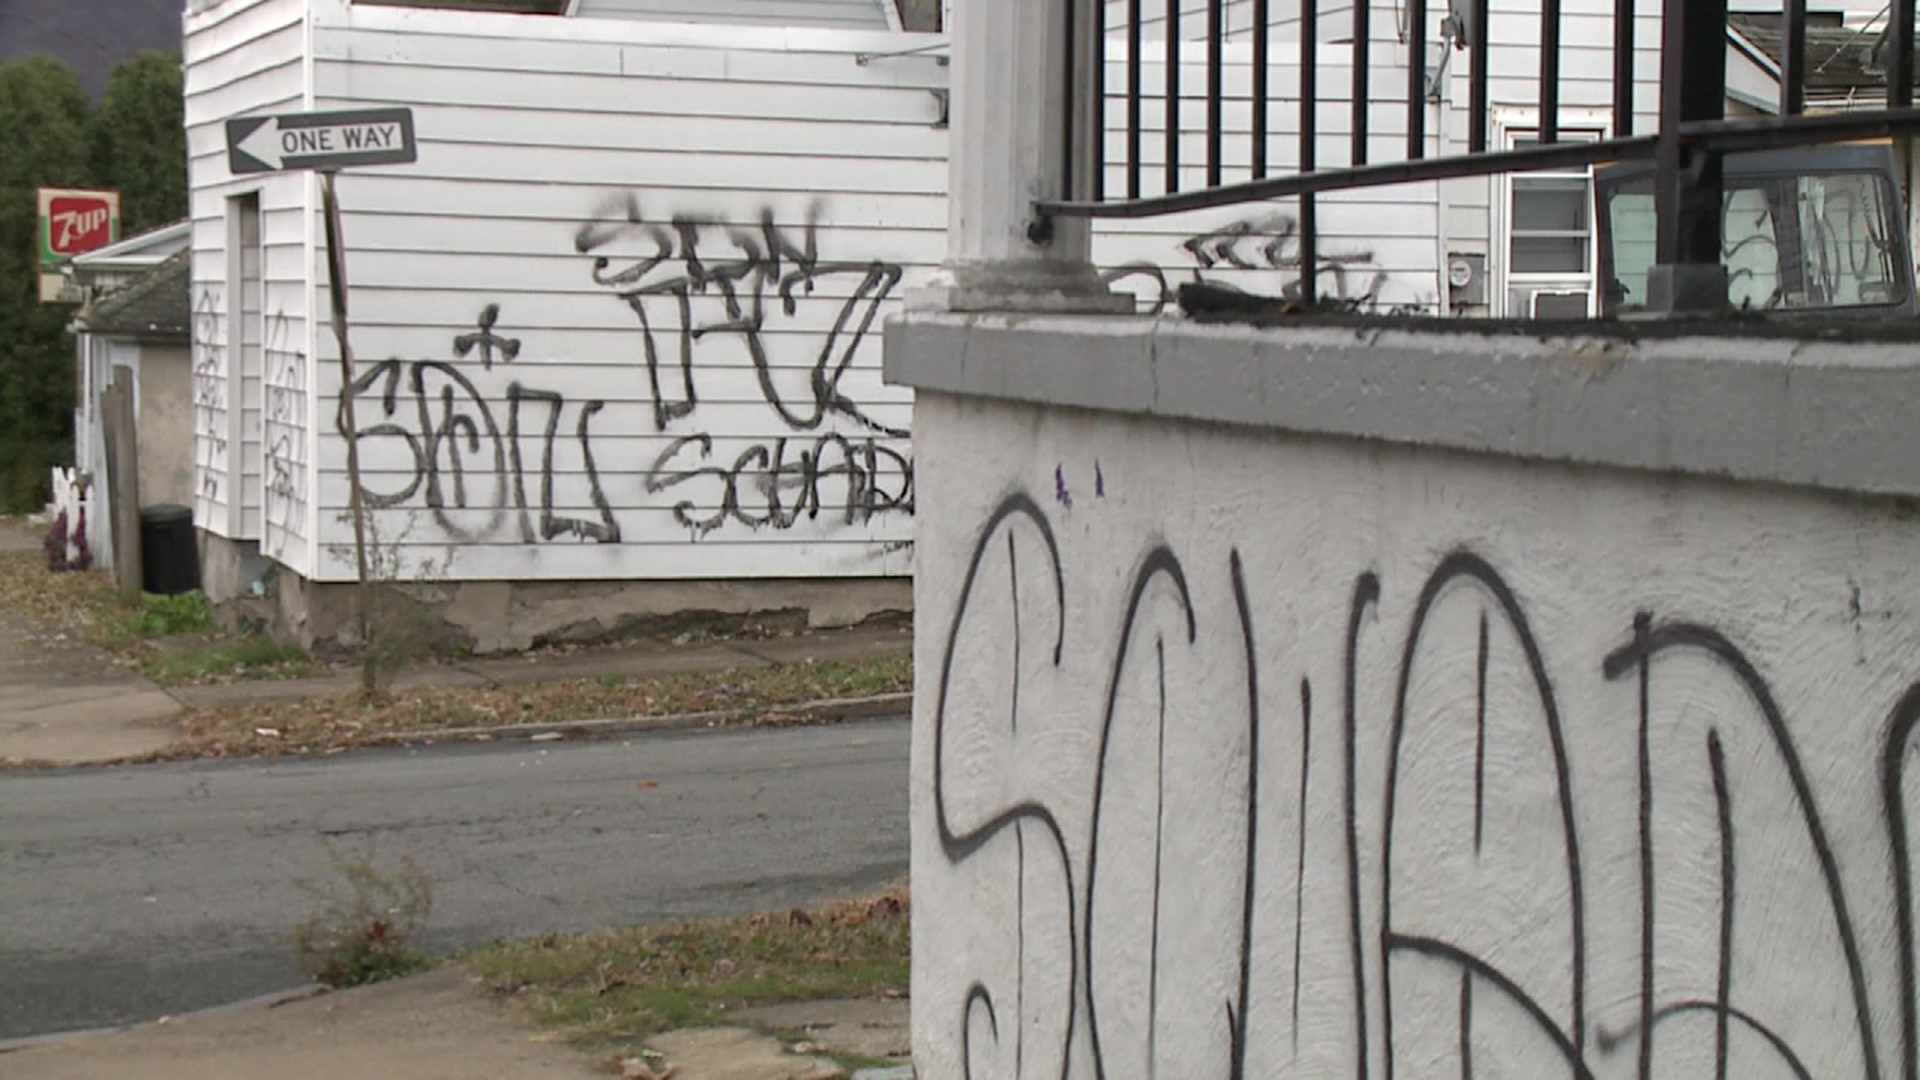 Several homeowners in Wilkes-Barre woke up to graffiti covering homes on their block.